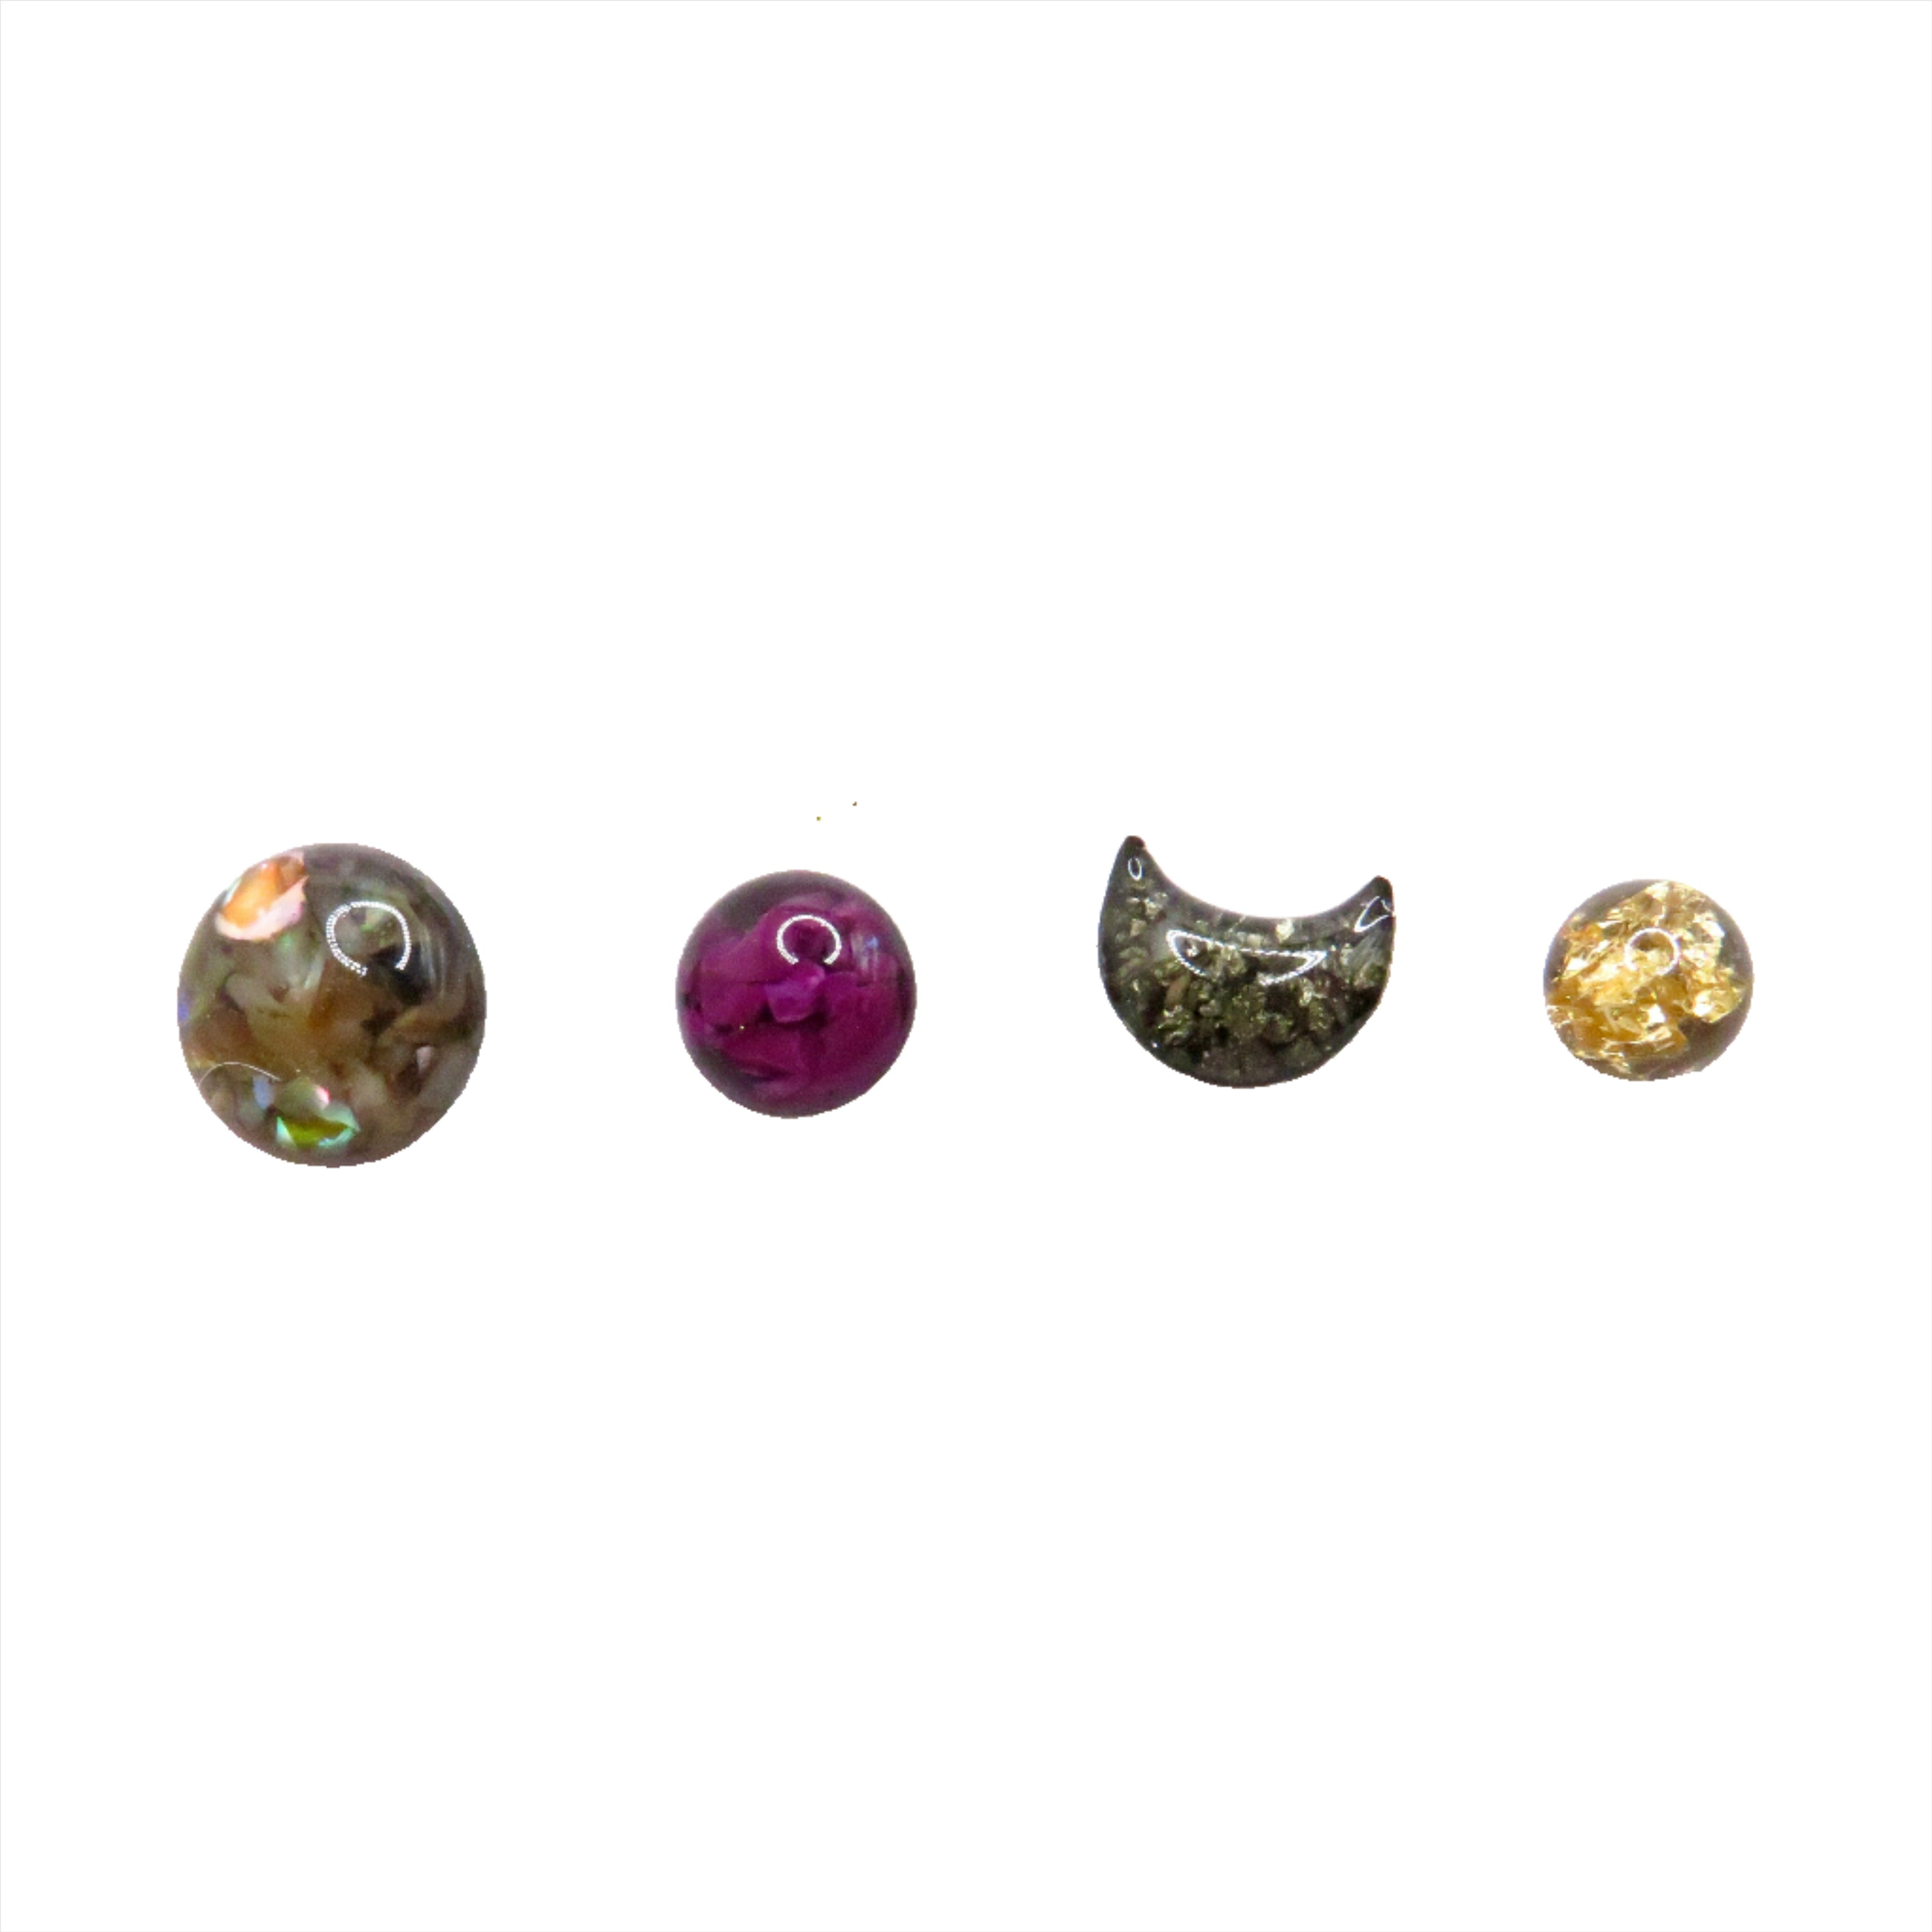 Assorted Crushed Gemstone Stud Earrings | Mixed Pack of 4